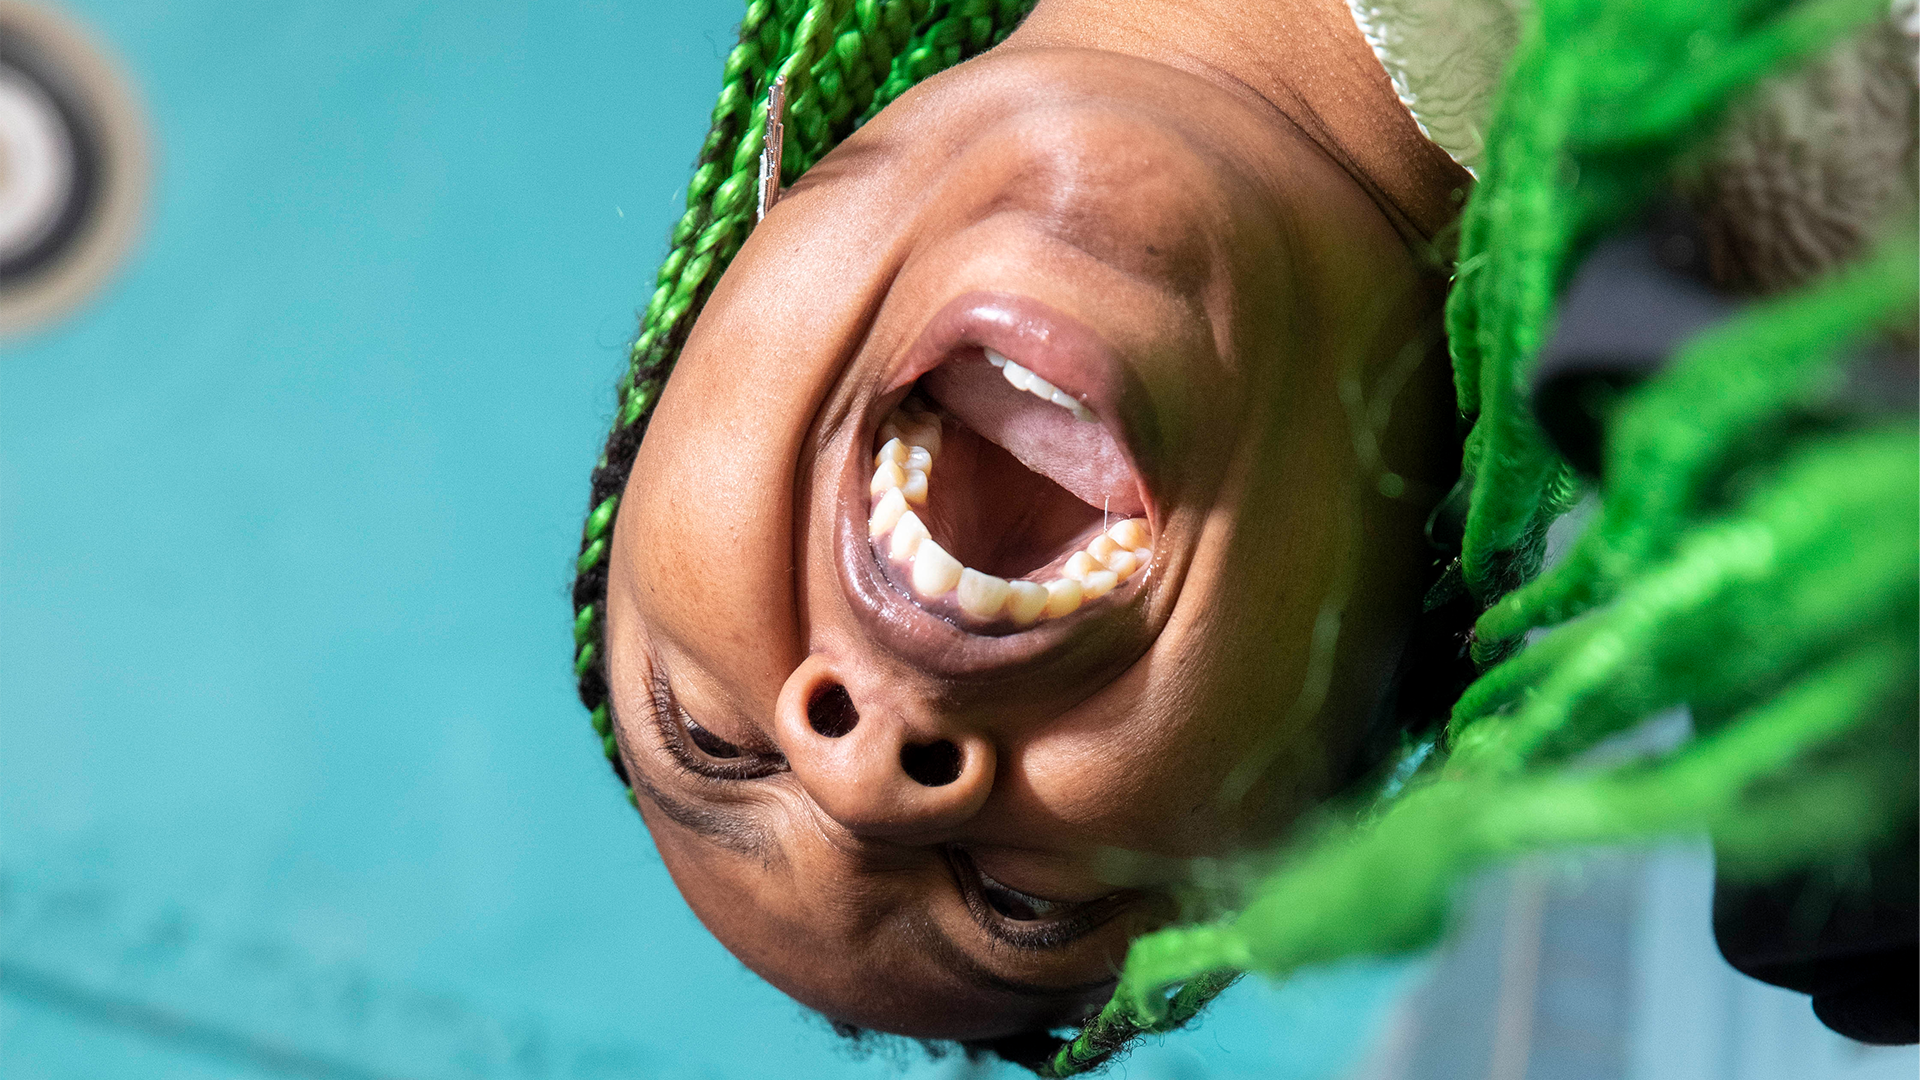 From beneath we look up at the image of Martine Syms pressing an apartment call button and apparently yelling. They have bright green braids and above them is a blue ceiling.